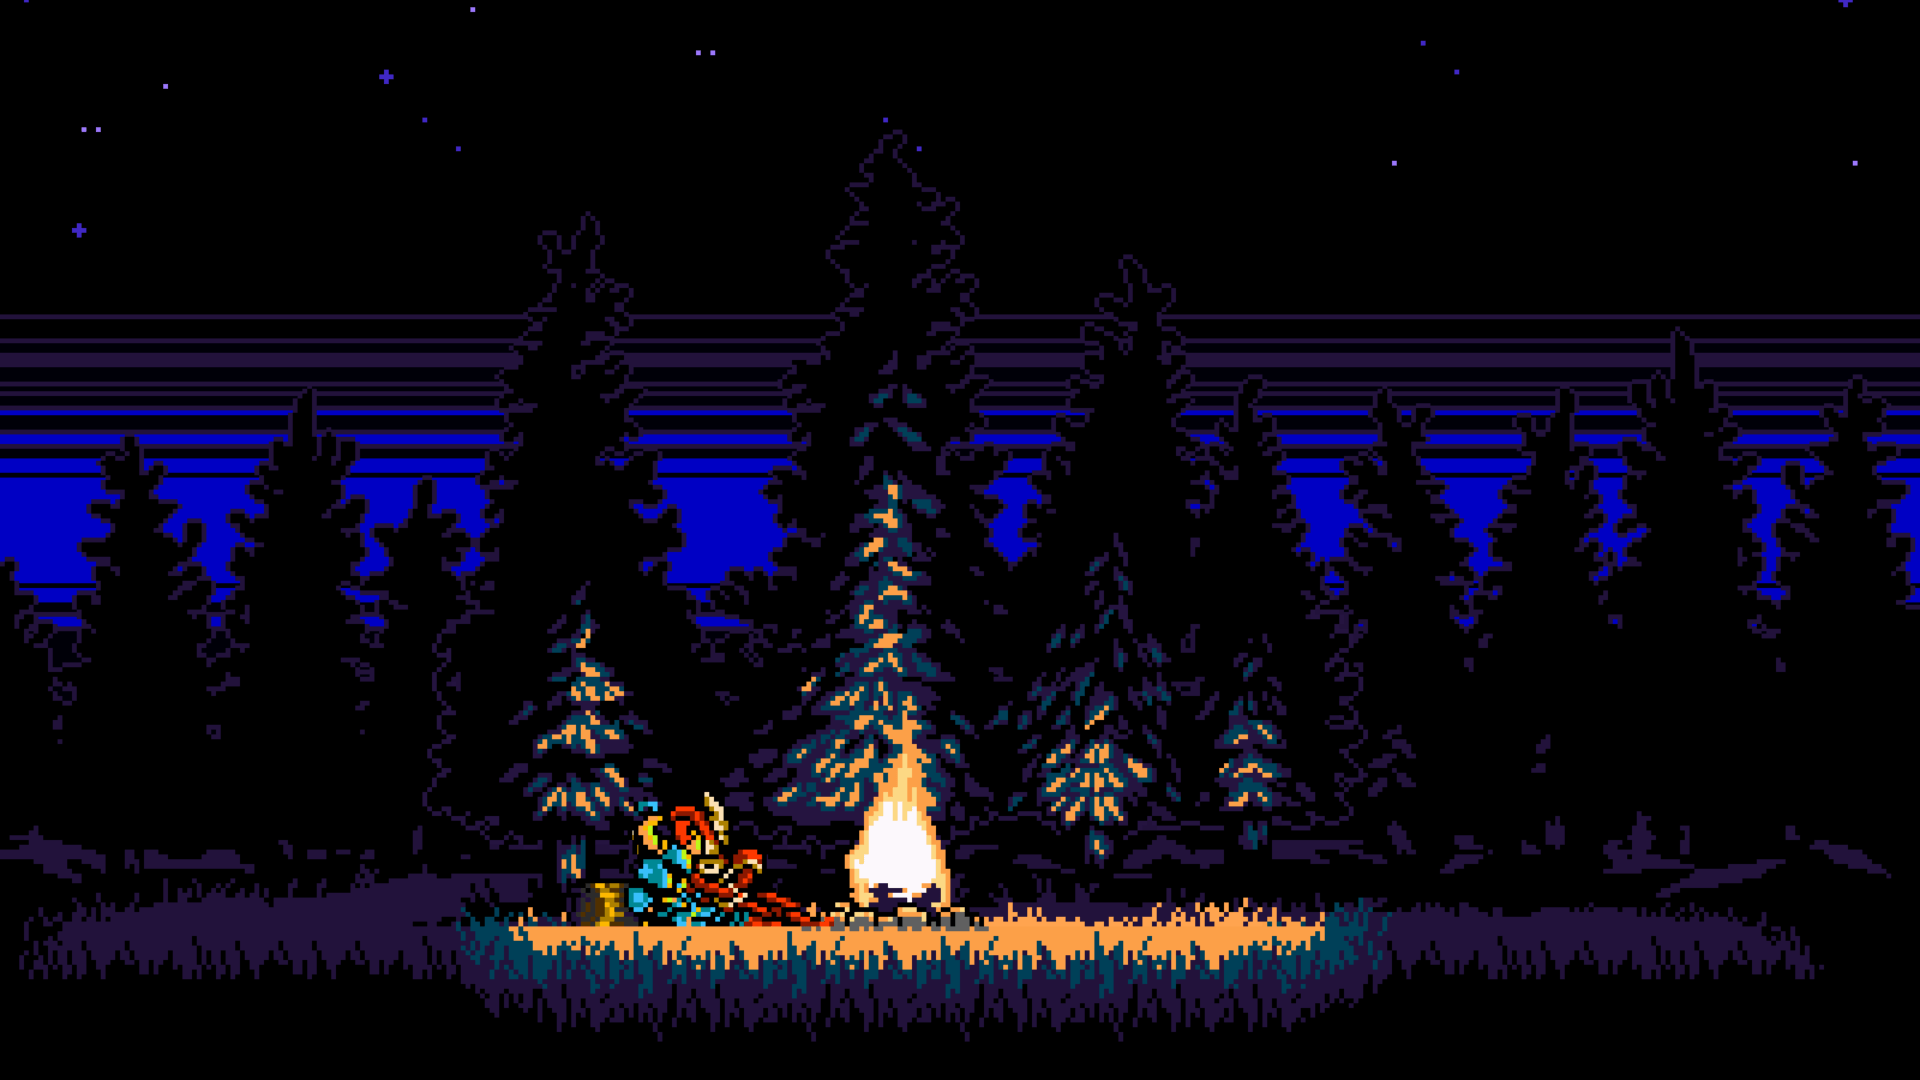 Made a Shovel Knight wallpaper for those that are interested